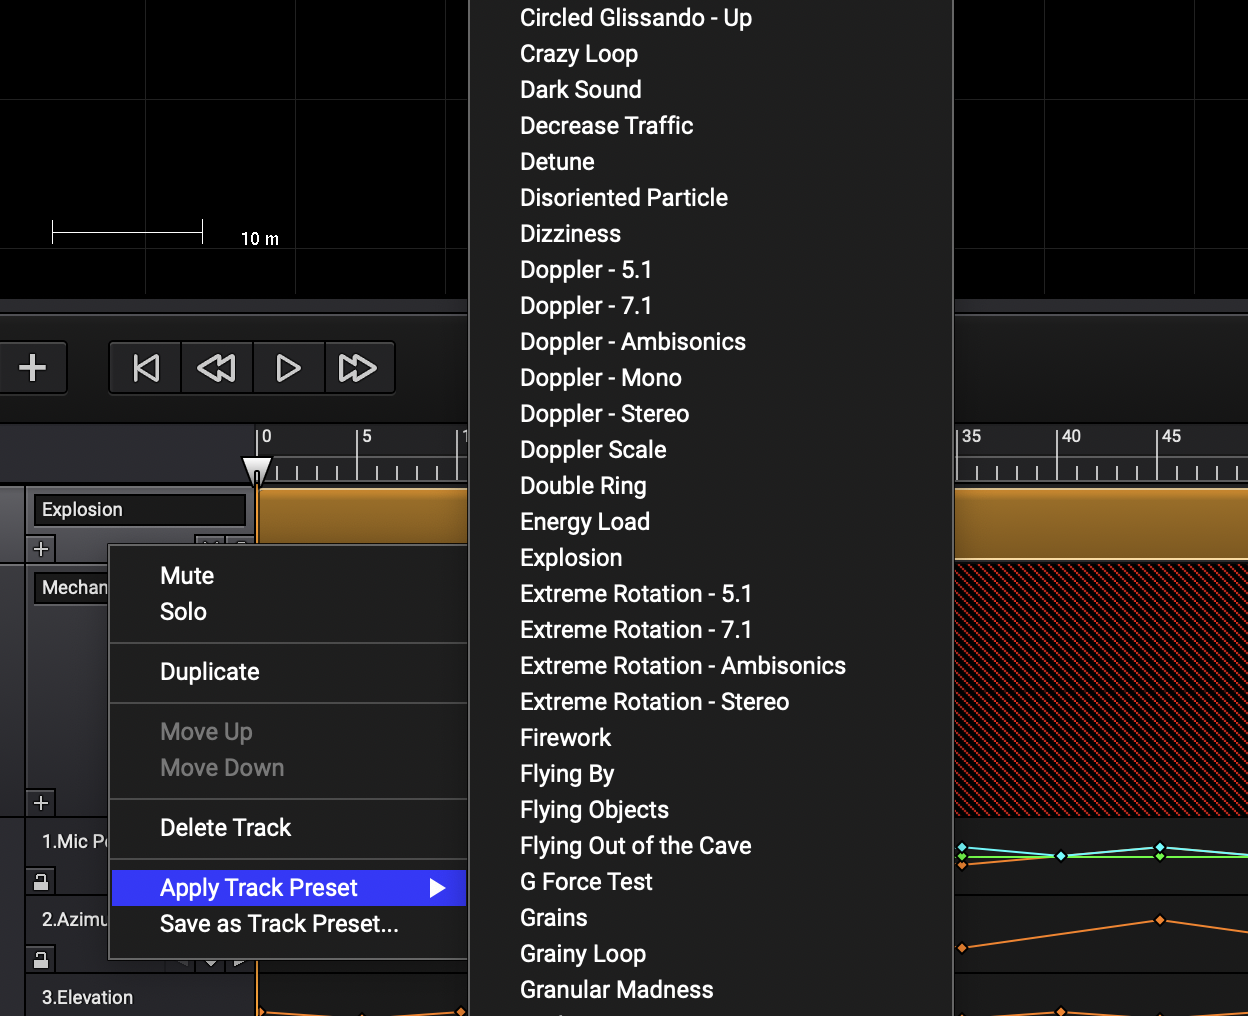 Sound Particles Density instaling